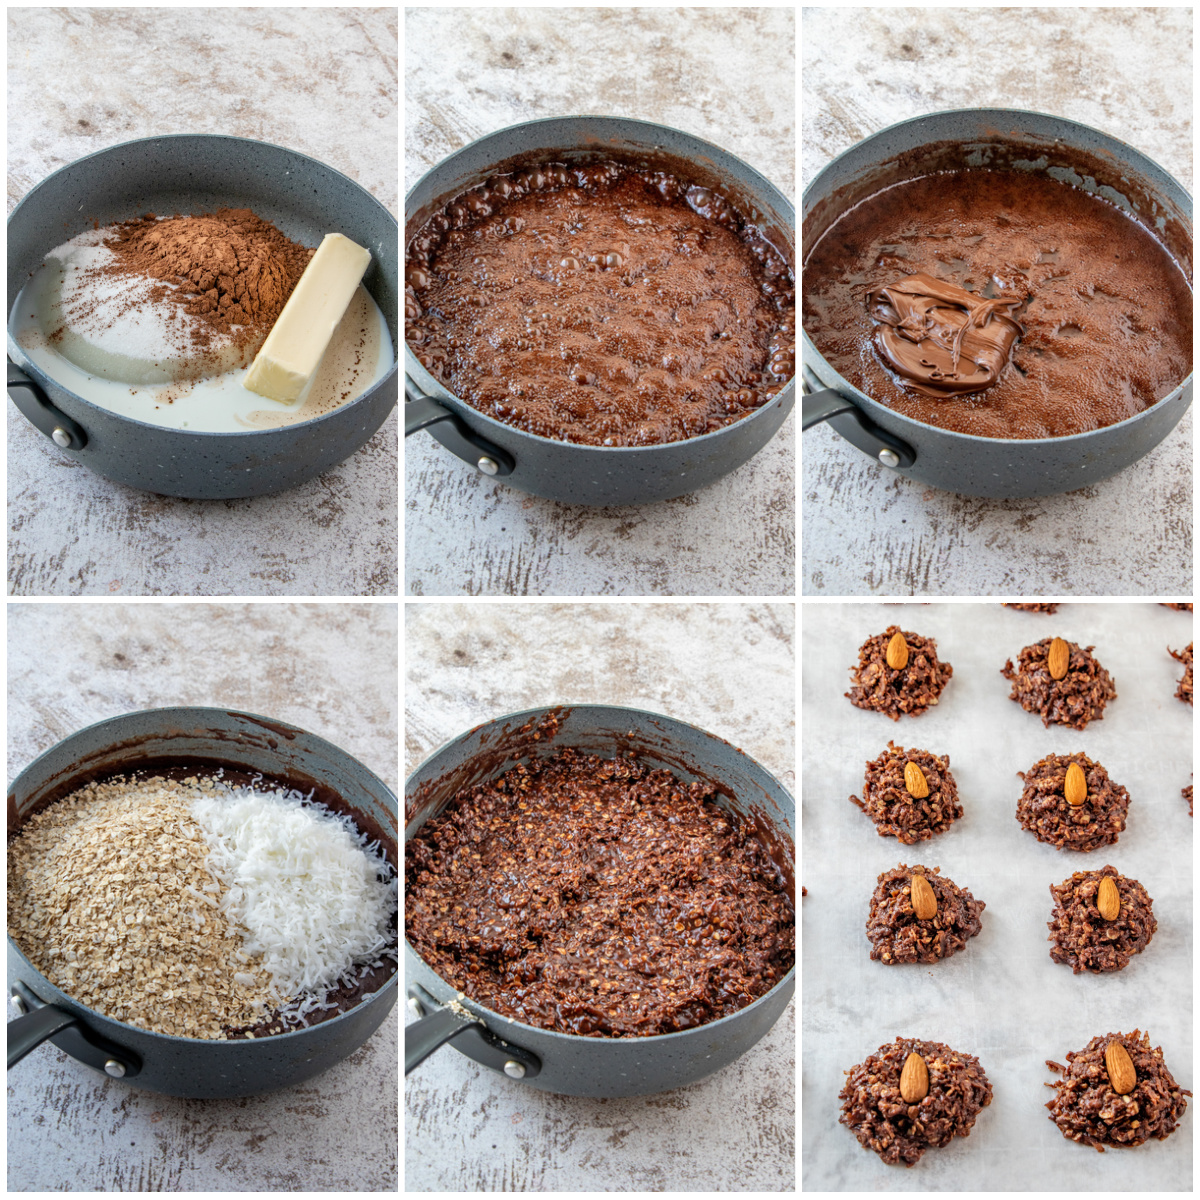 Step by step photos on how to make Almond Joy Cookies